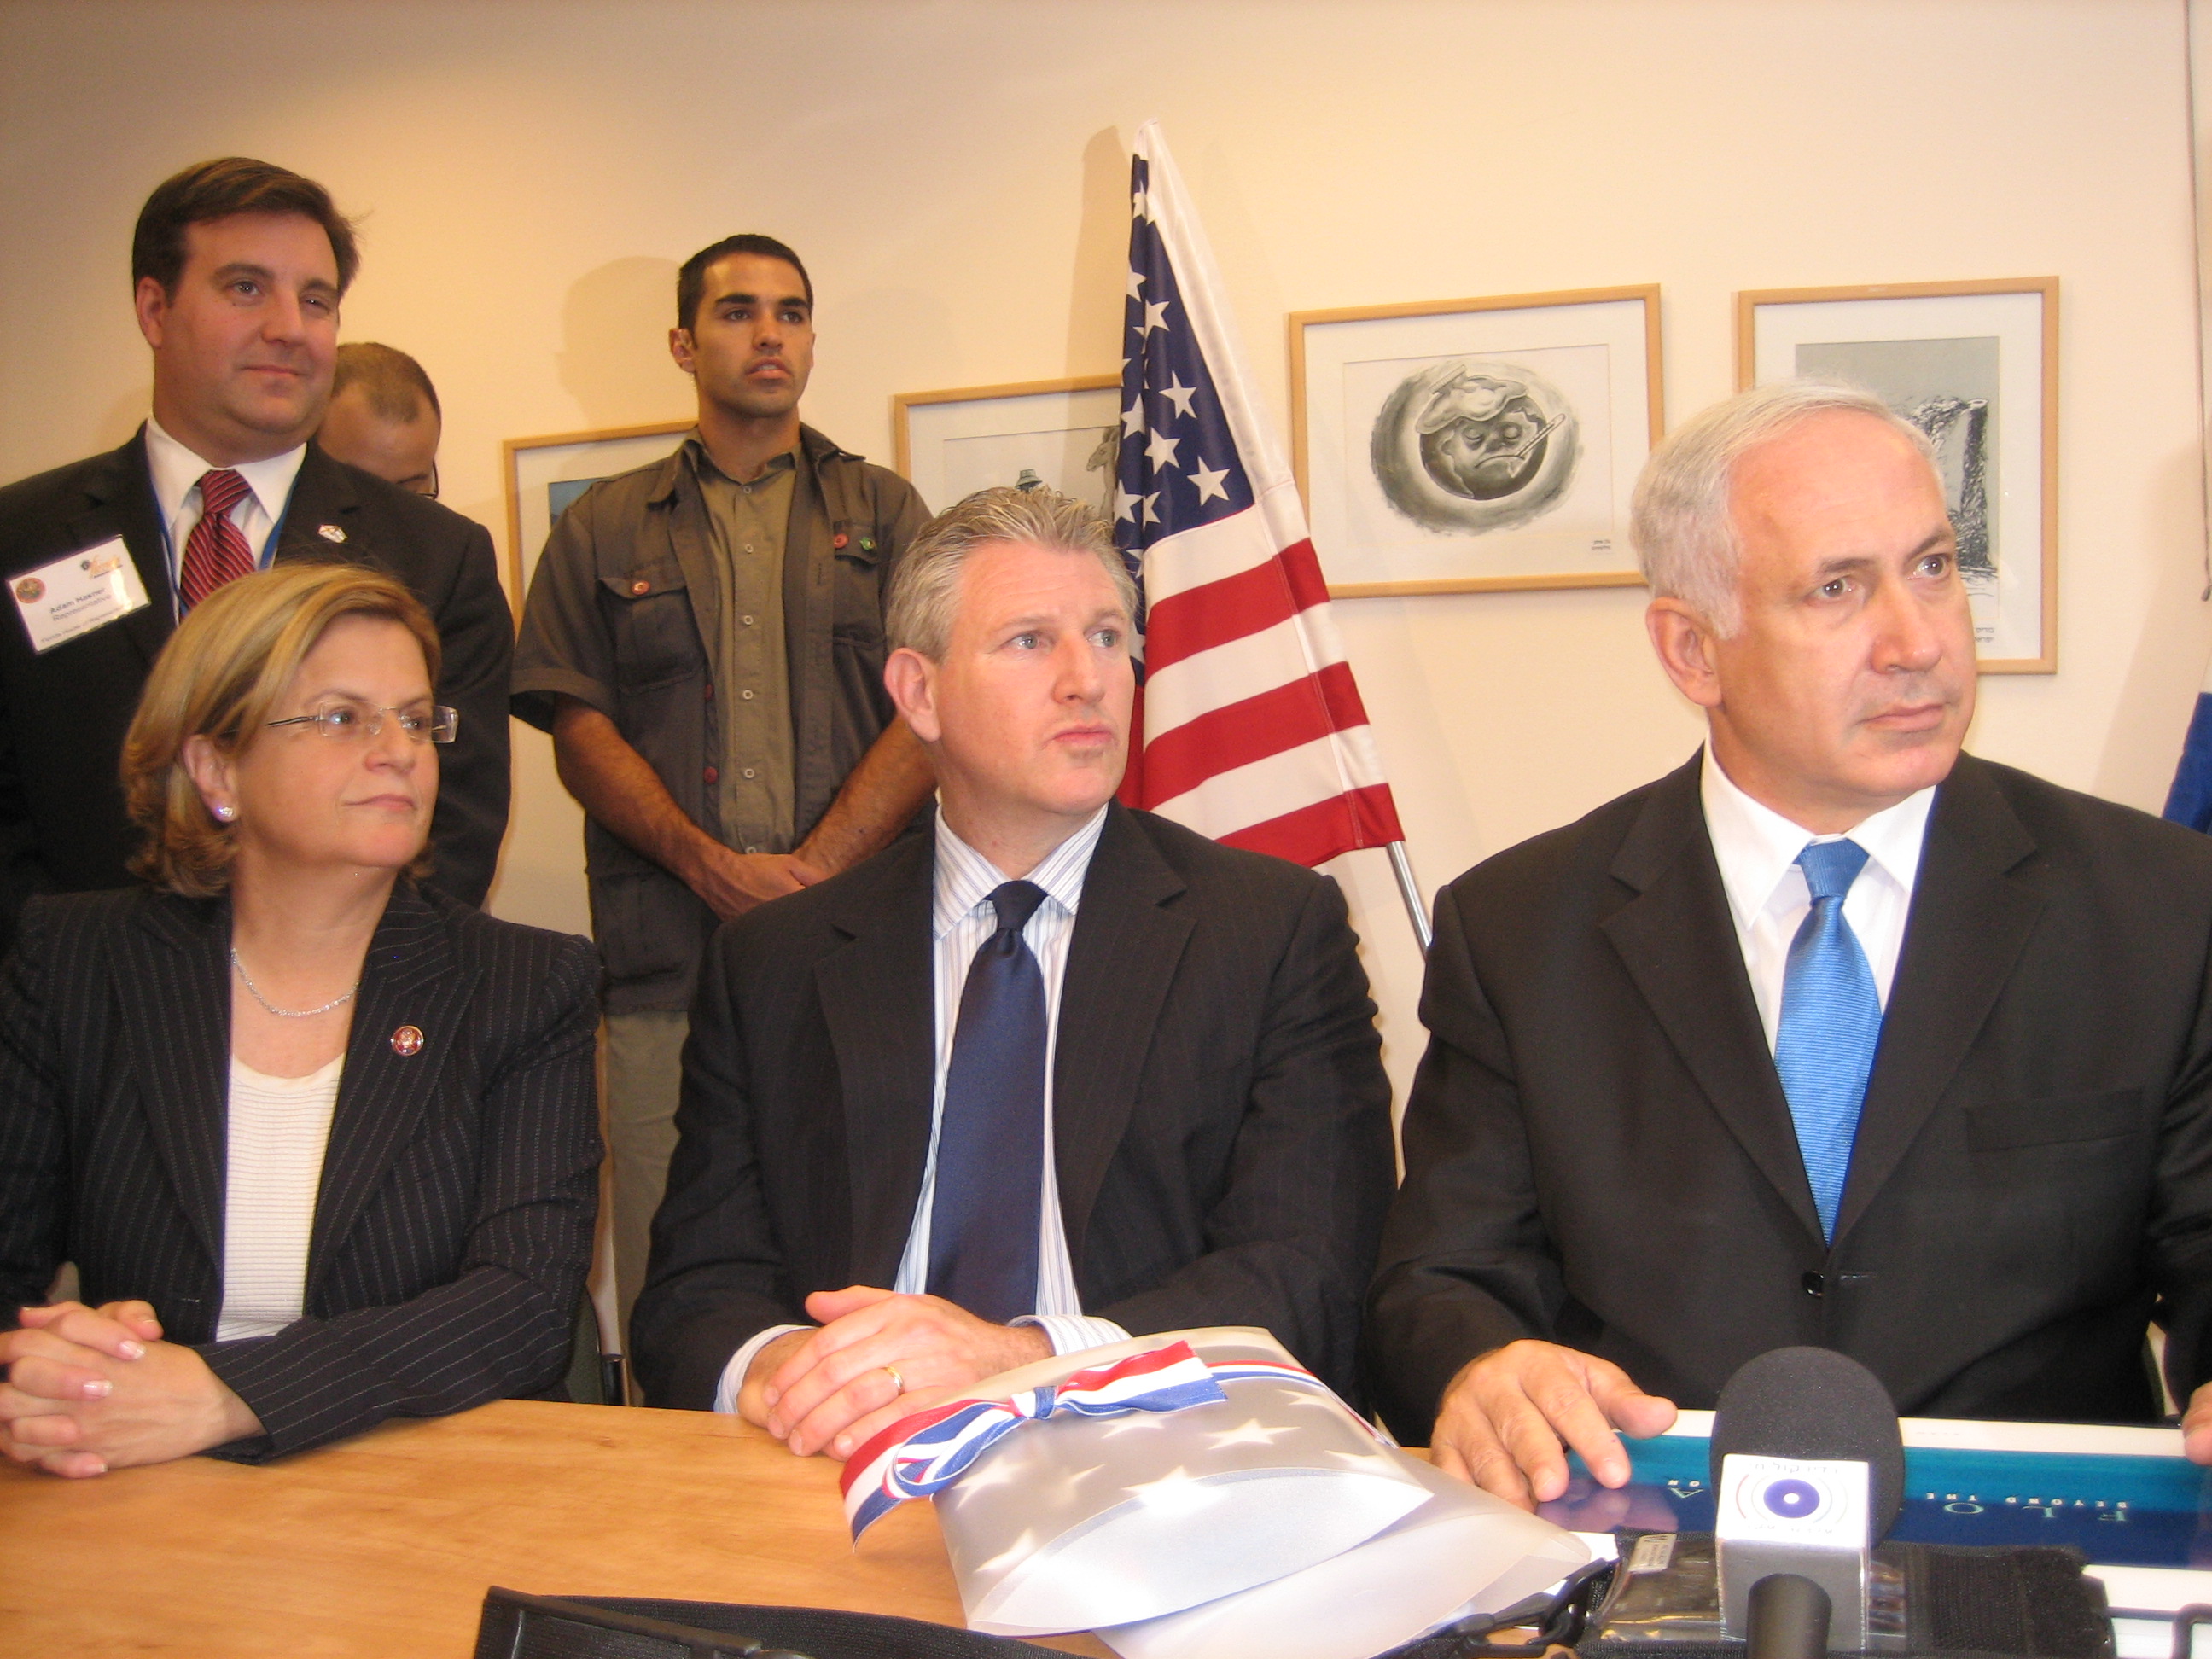 Ranking Member Ros-Lehtinen and Rep. Robert Wexler join curent Chairman of the Likud Party and former Israeli Prime Minister Benjamin Netanyahu in a question and answer session with the press following a meeting with Netanyahu to discuss Iran, Syria, and developments in the West Bank and Gaza.